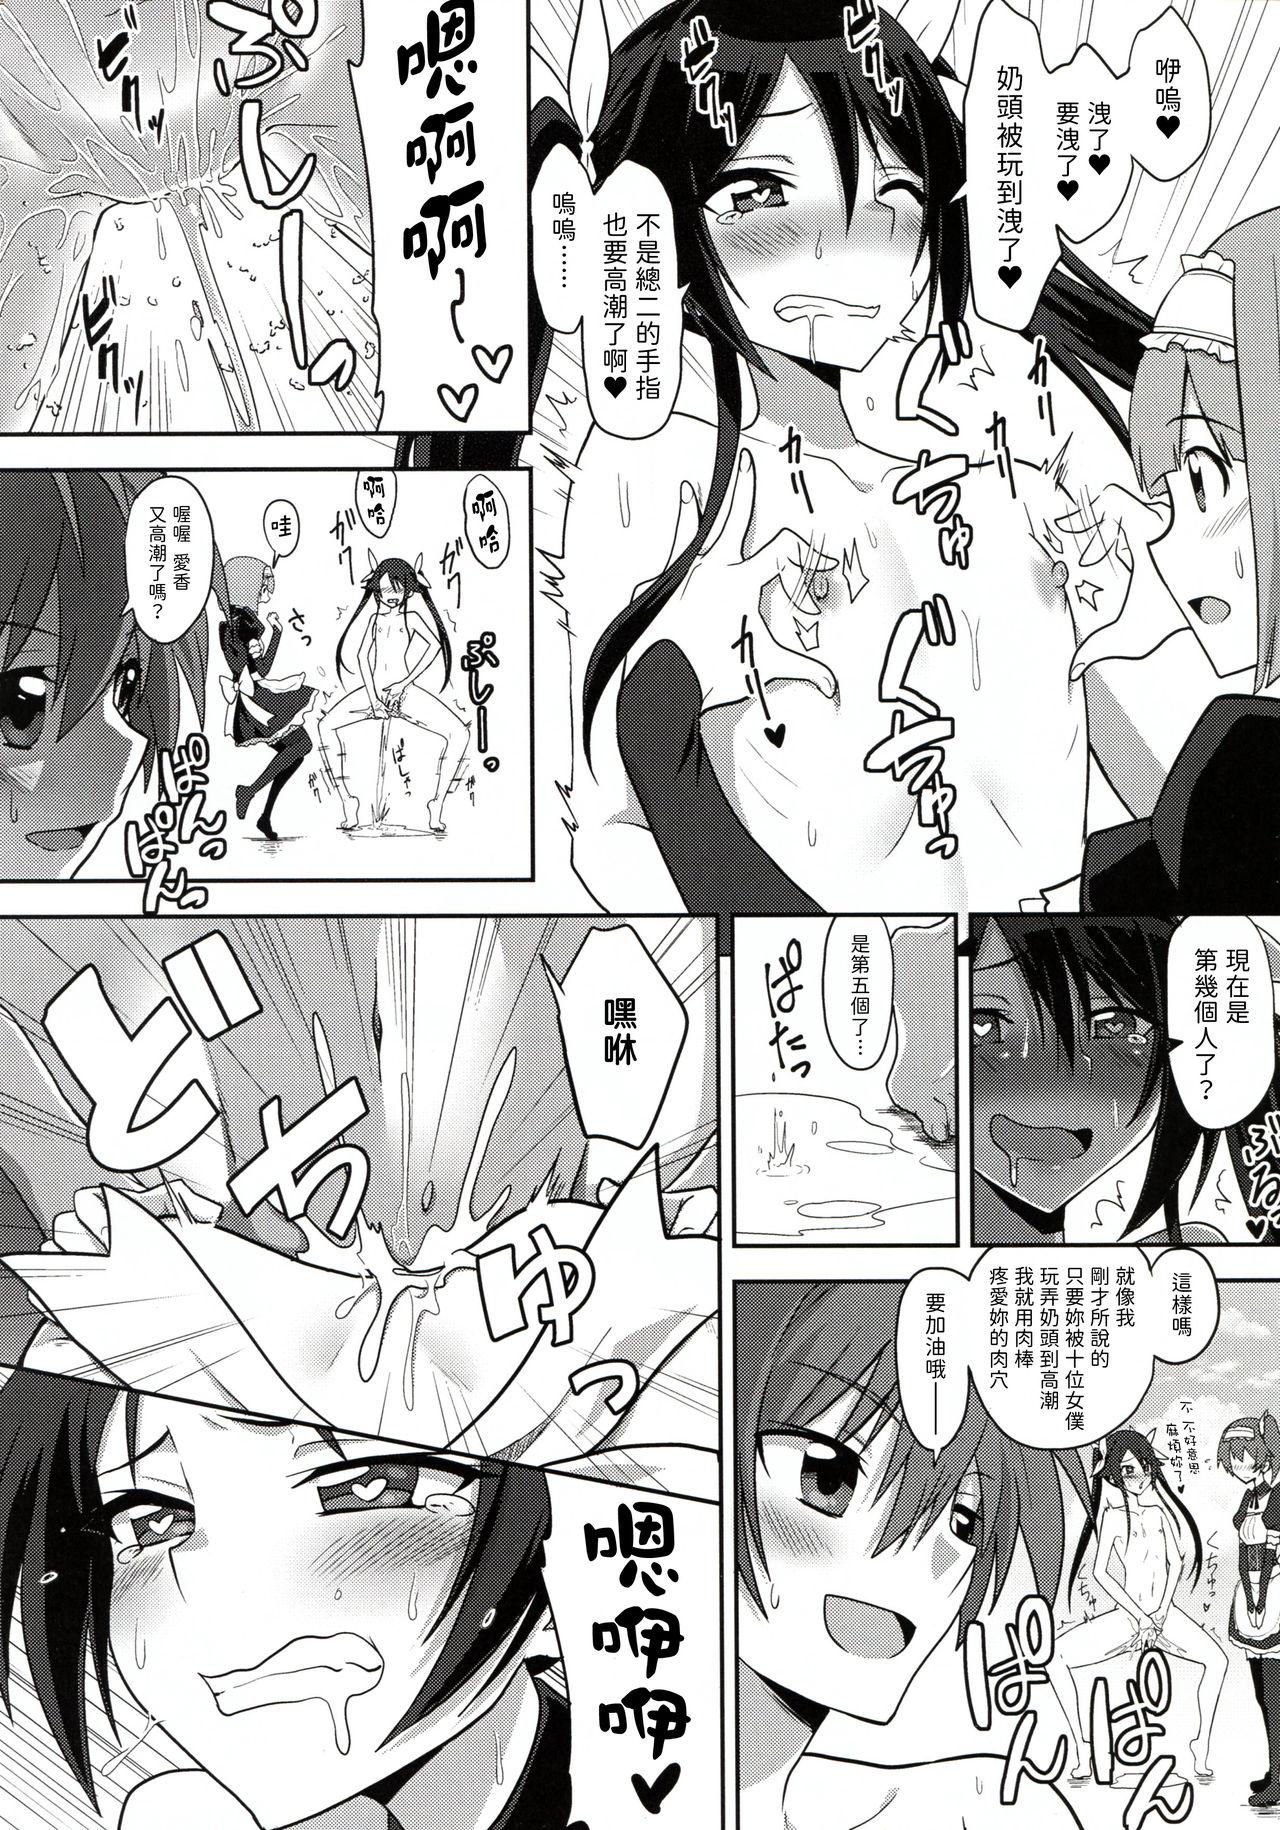 Swingers Twintail Vacance - Ore twintail ni narimasu. | gonna be the twin-tails Blackdick - Page 10